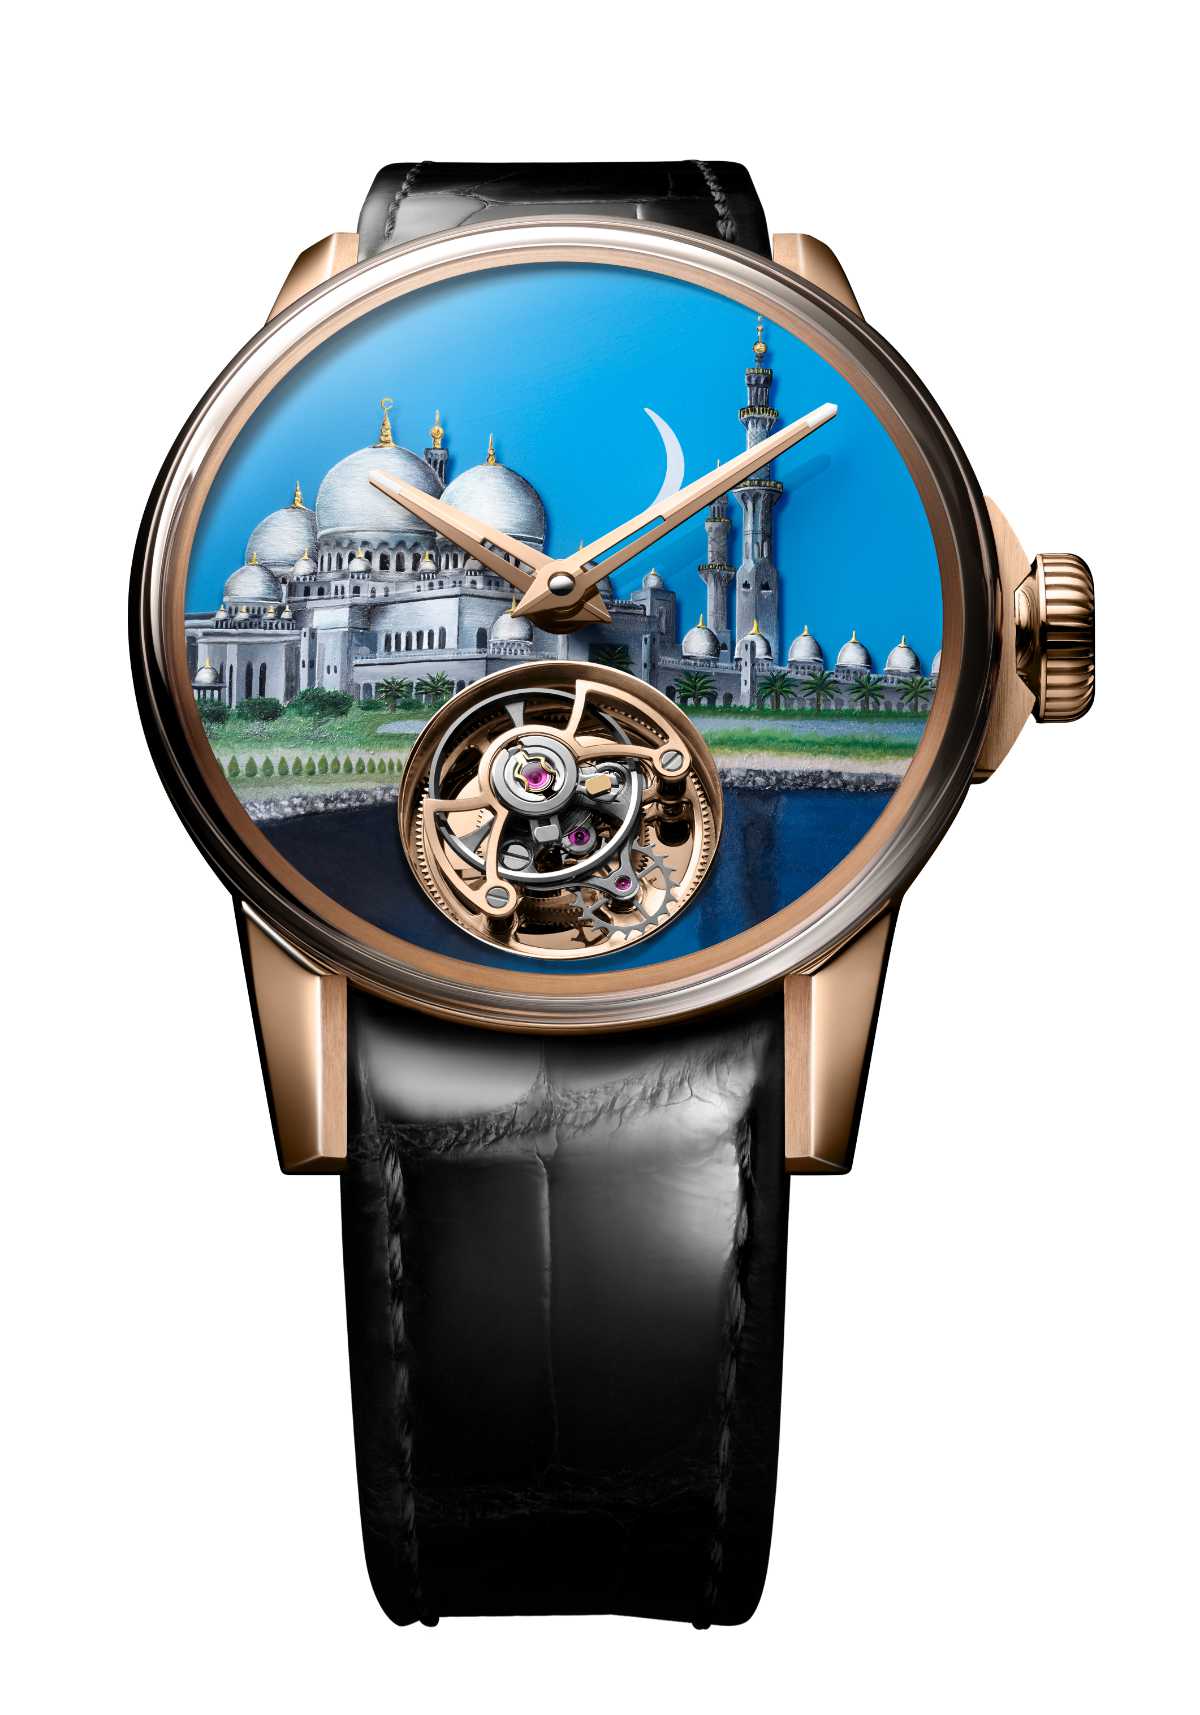 Around The World In Eight Days With Louis Moinet